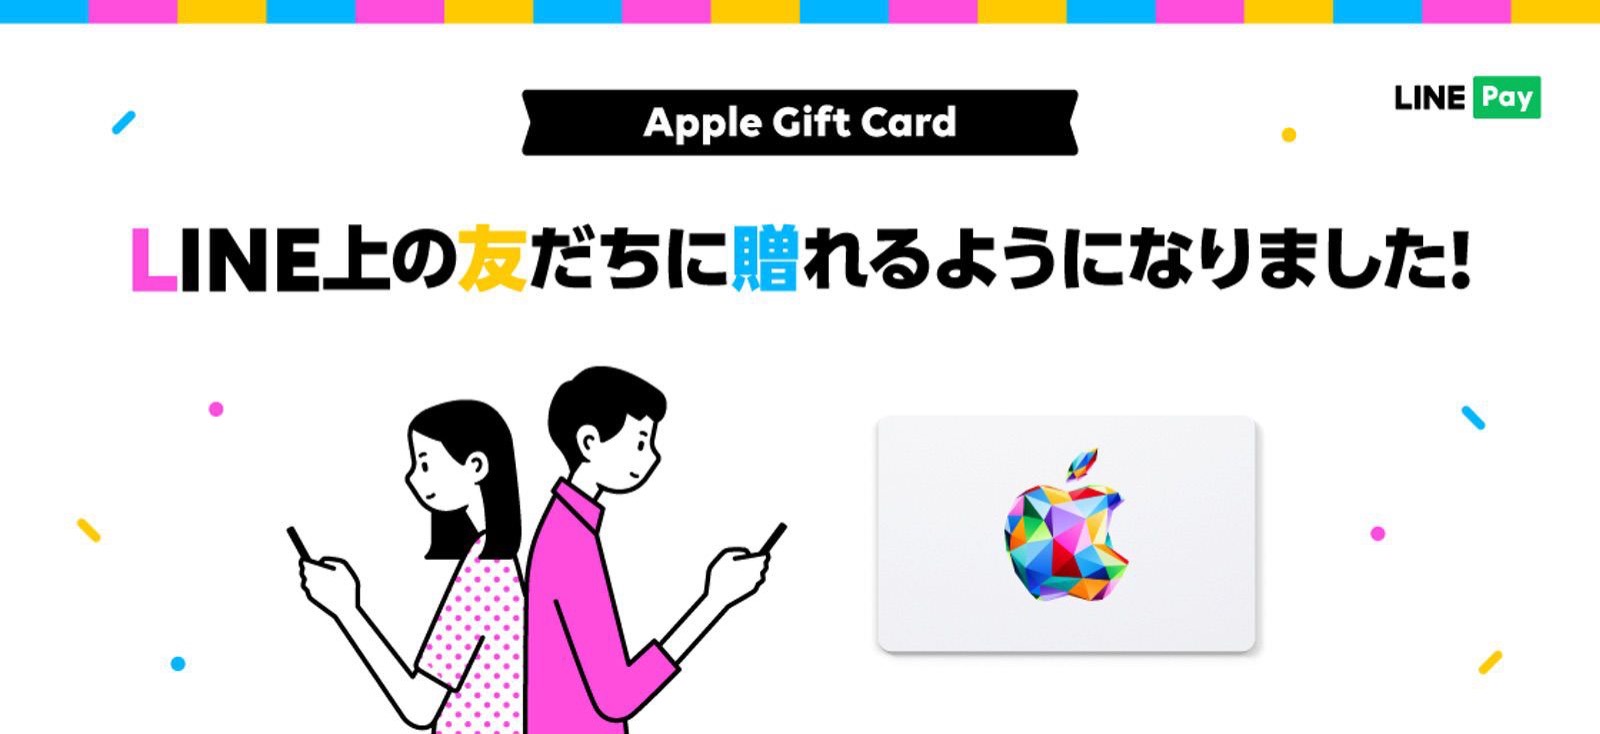 LINE Pay Apple Gift Card 04